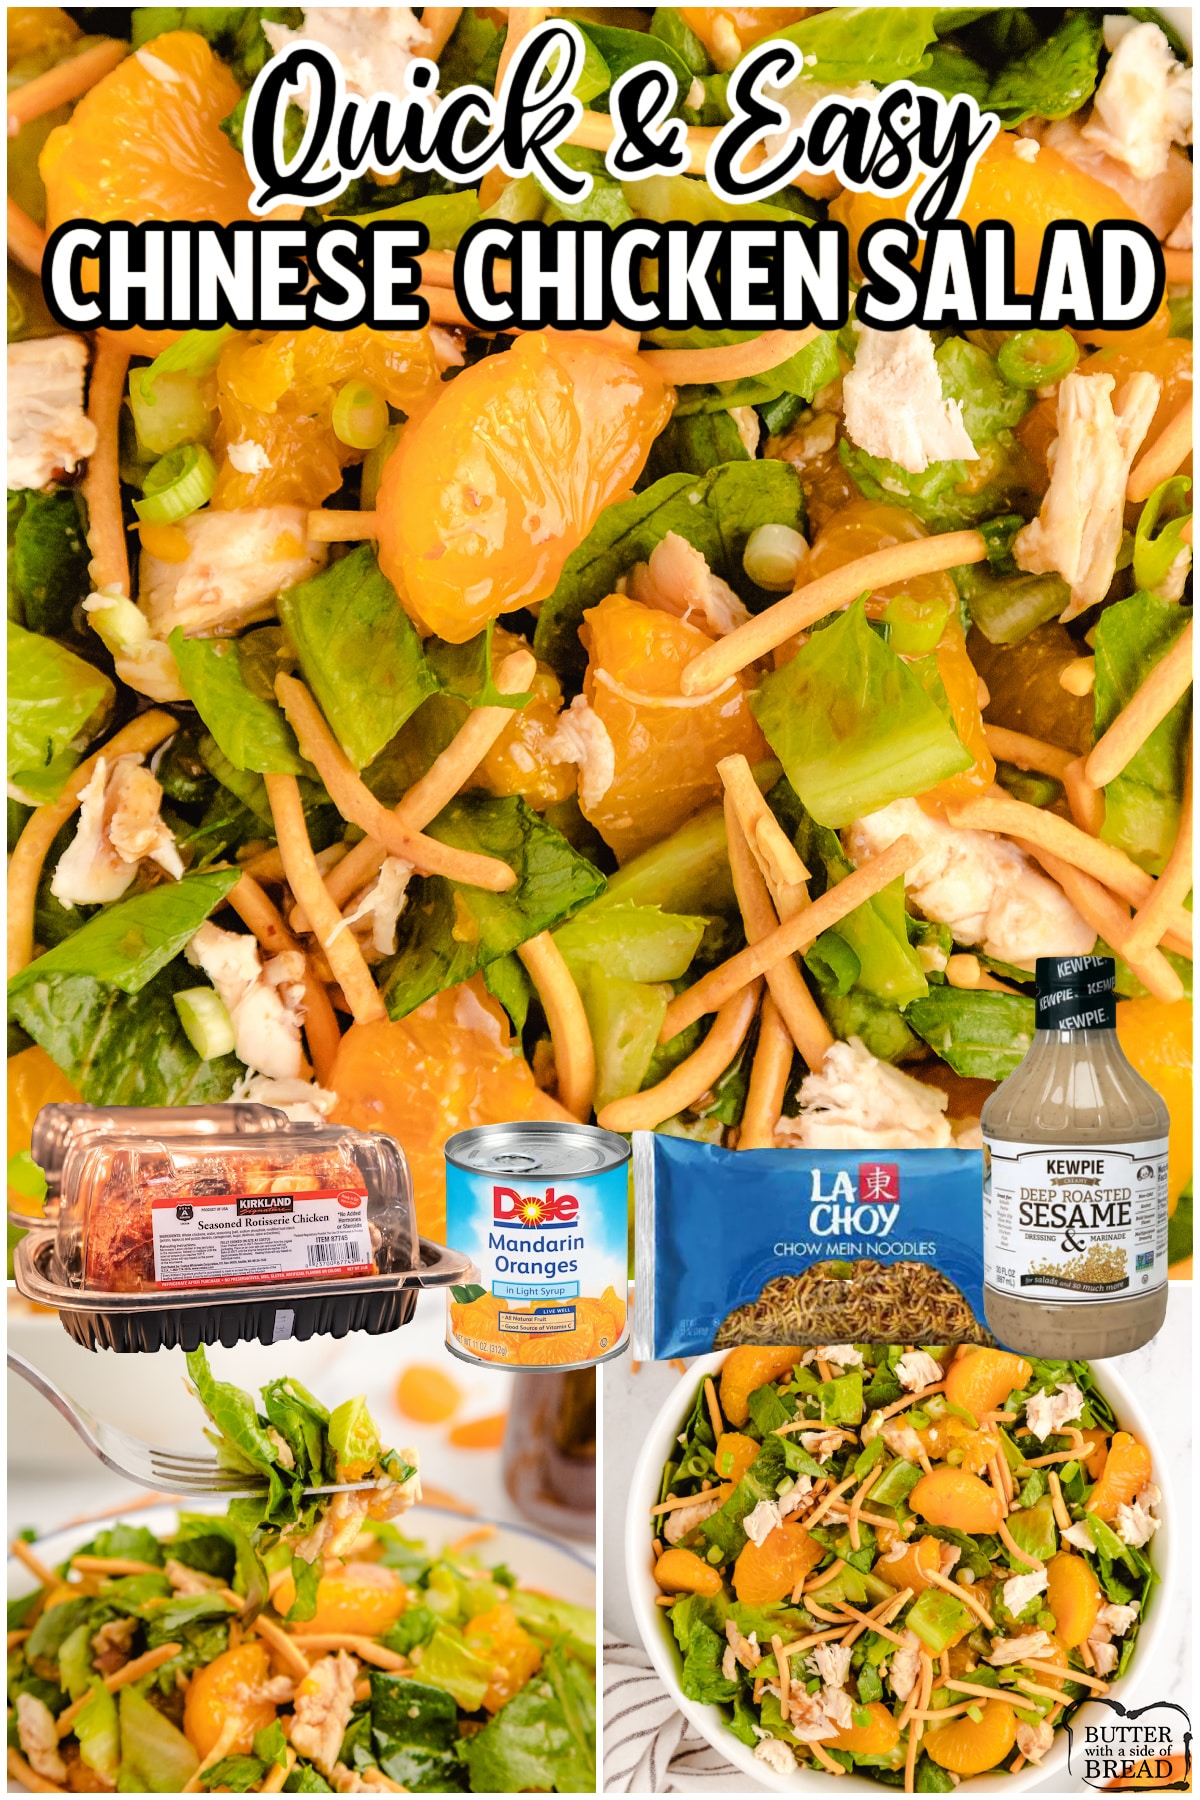 Chinese Chicken Salad is a light, flavorful salad made with grilled chicken, oranges, crunchy chow mein noodles, lettuce & topped with sesame dressing. It's a fantastic summer dinner!